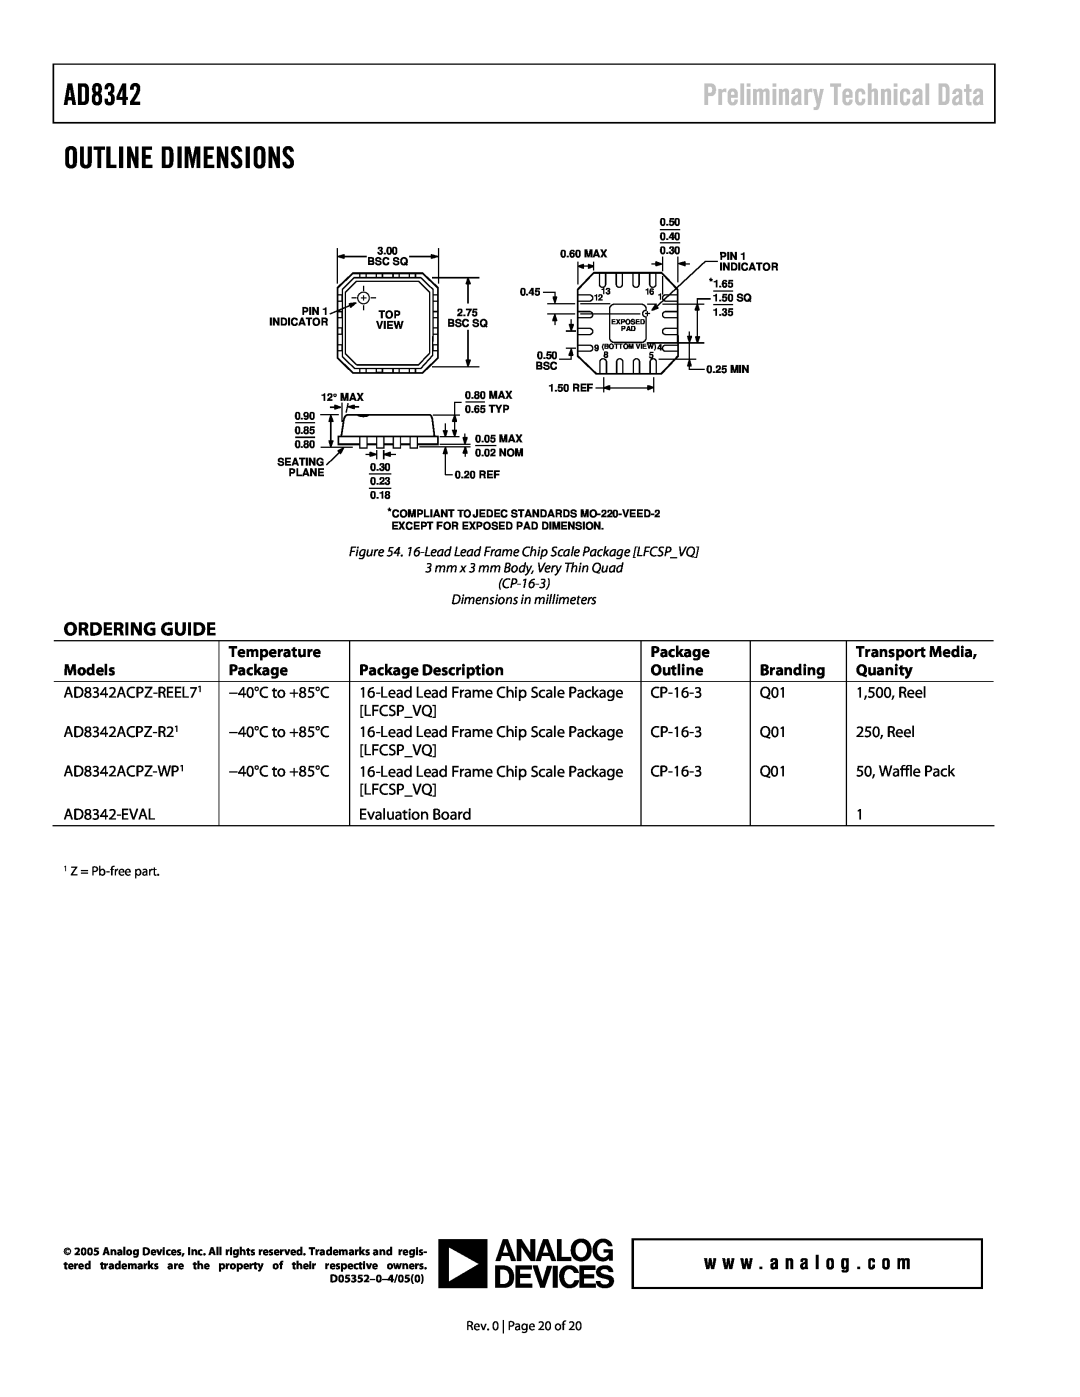 Analog Devices AD8342 specifications Outline Dimensions, Ordering Guide, Preliminary Technical Data 